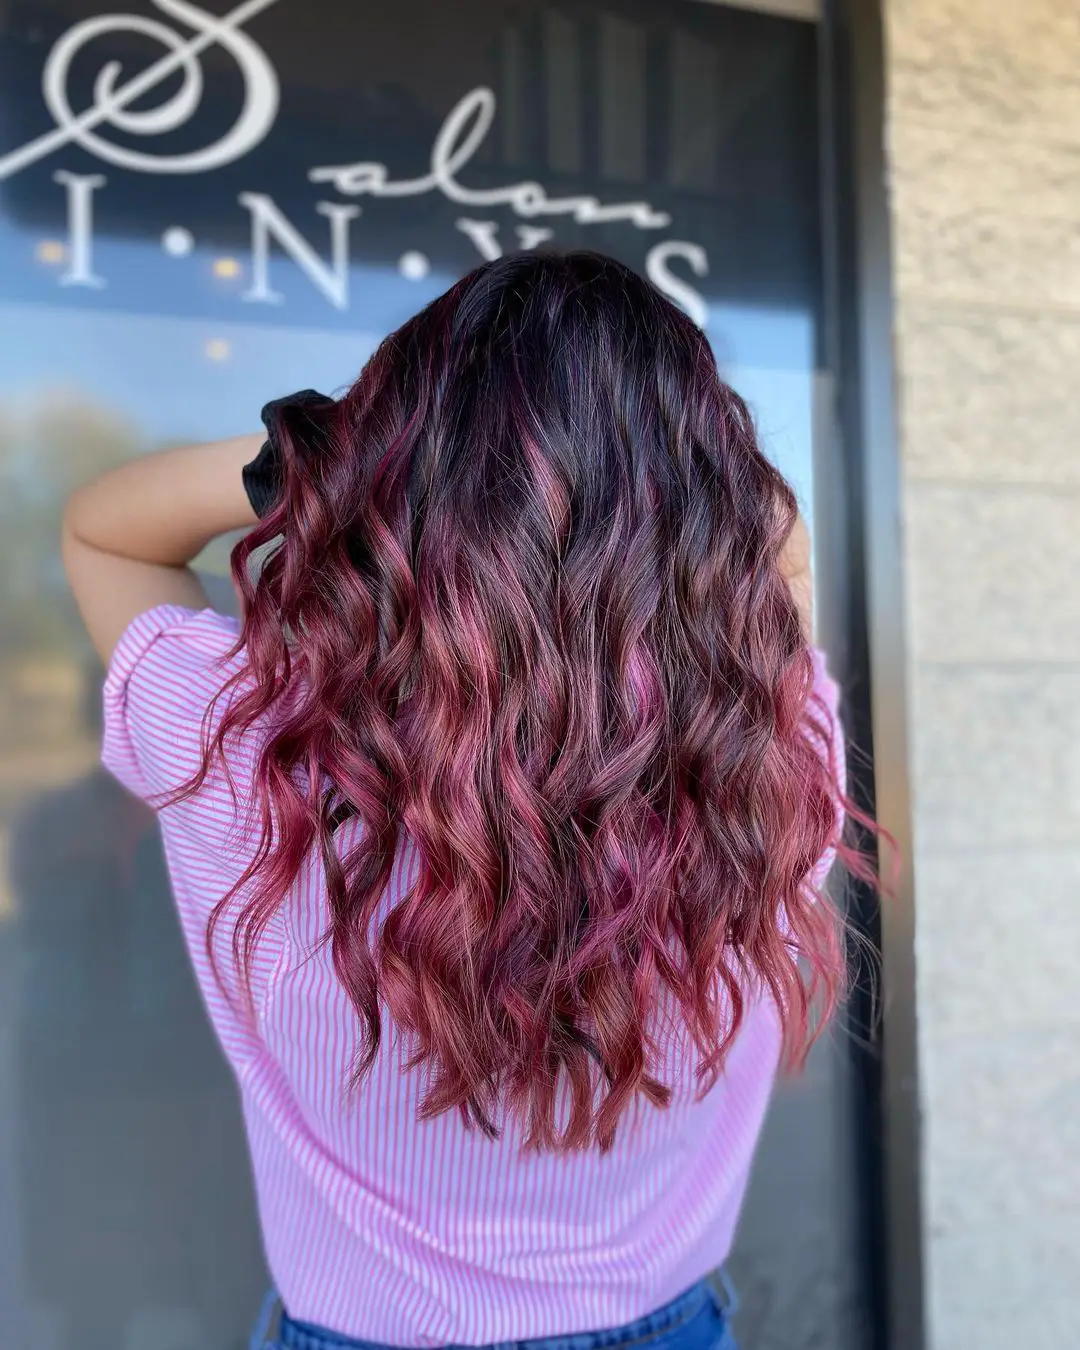 43-best-hairstyles-for-pink-hair Strawberries and Chocolate